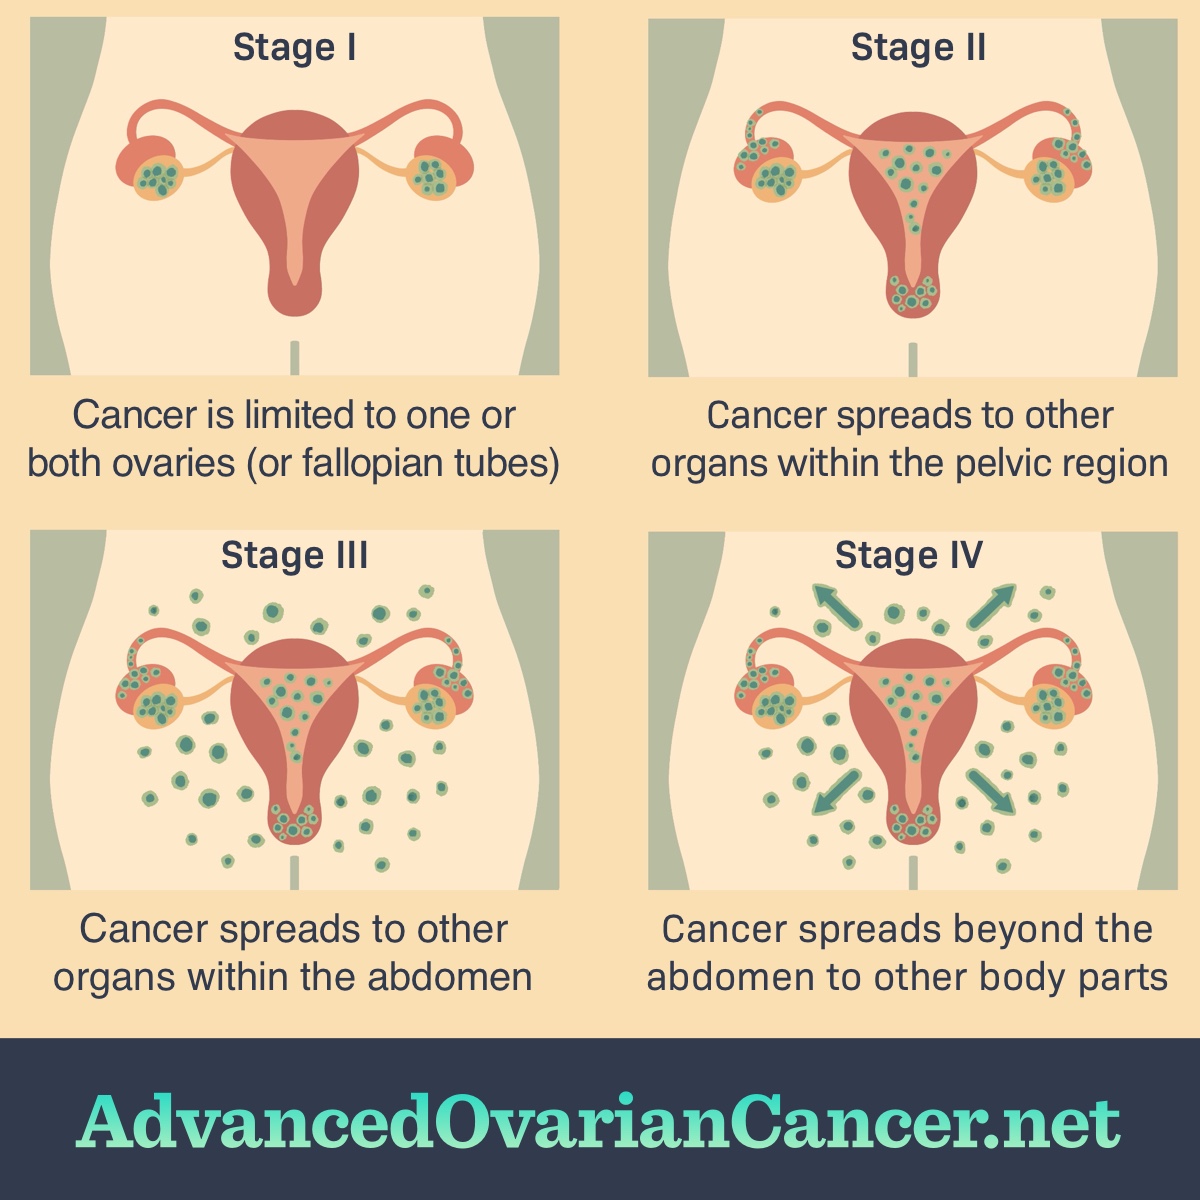 Four stages of ovarian cancer shown from early to late stage in the female reproductive organs.